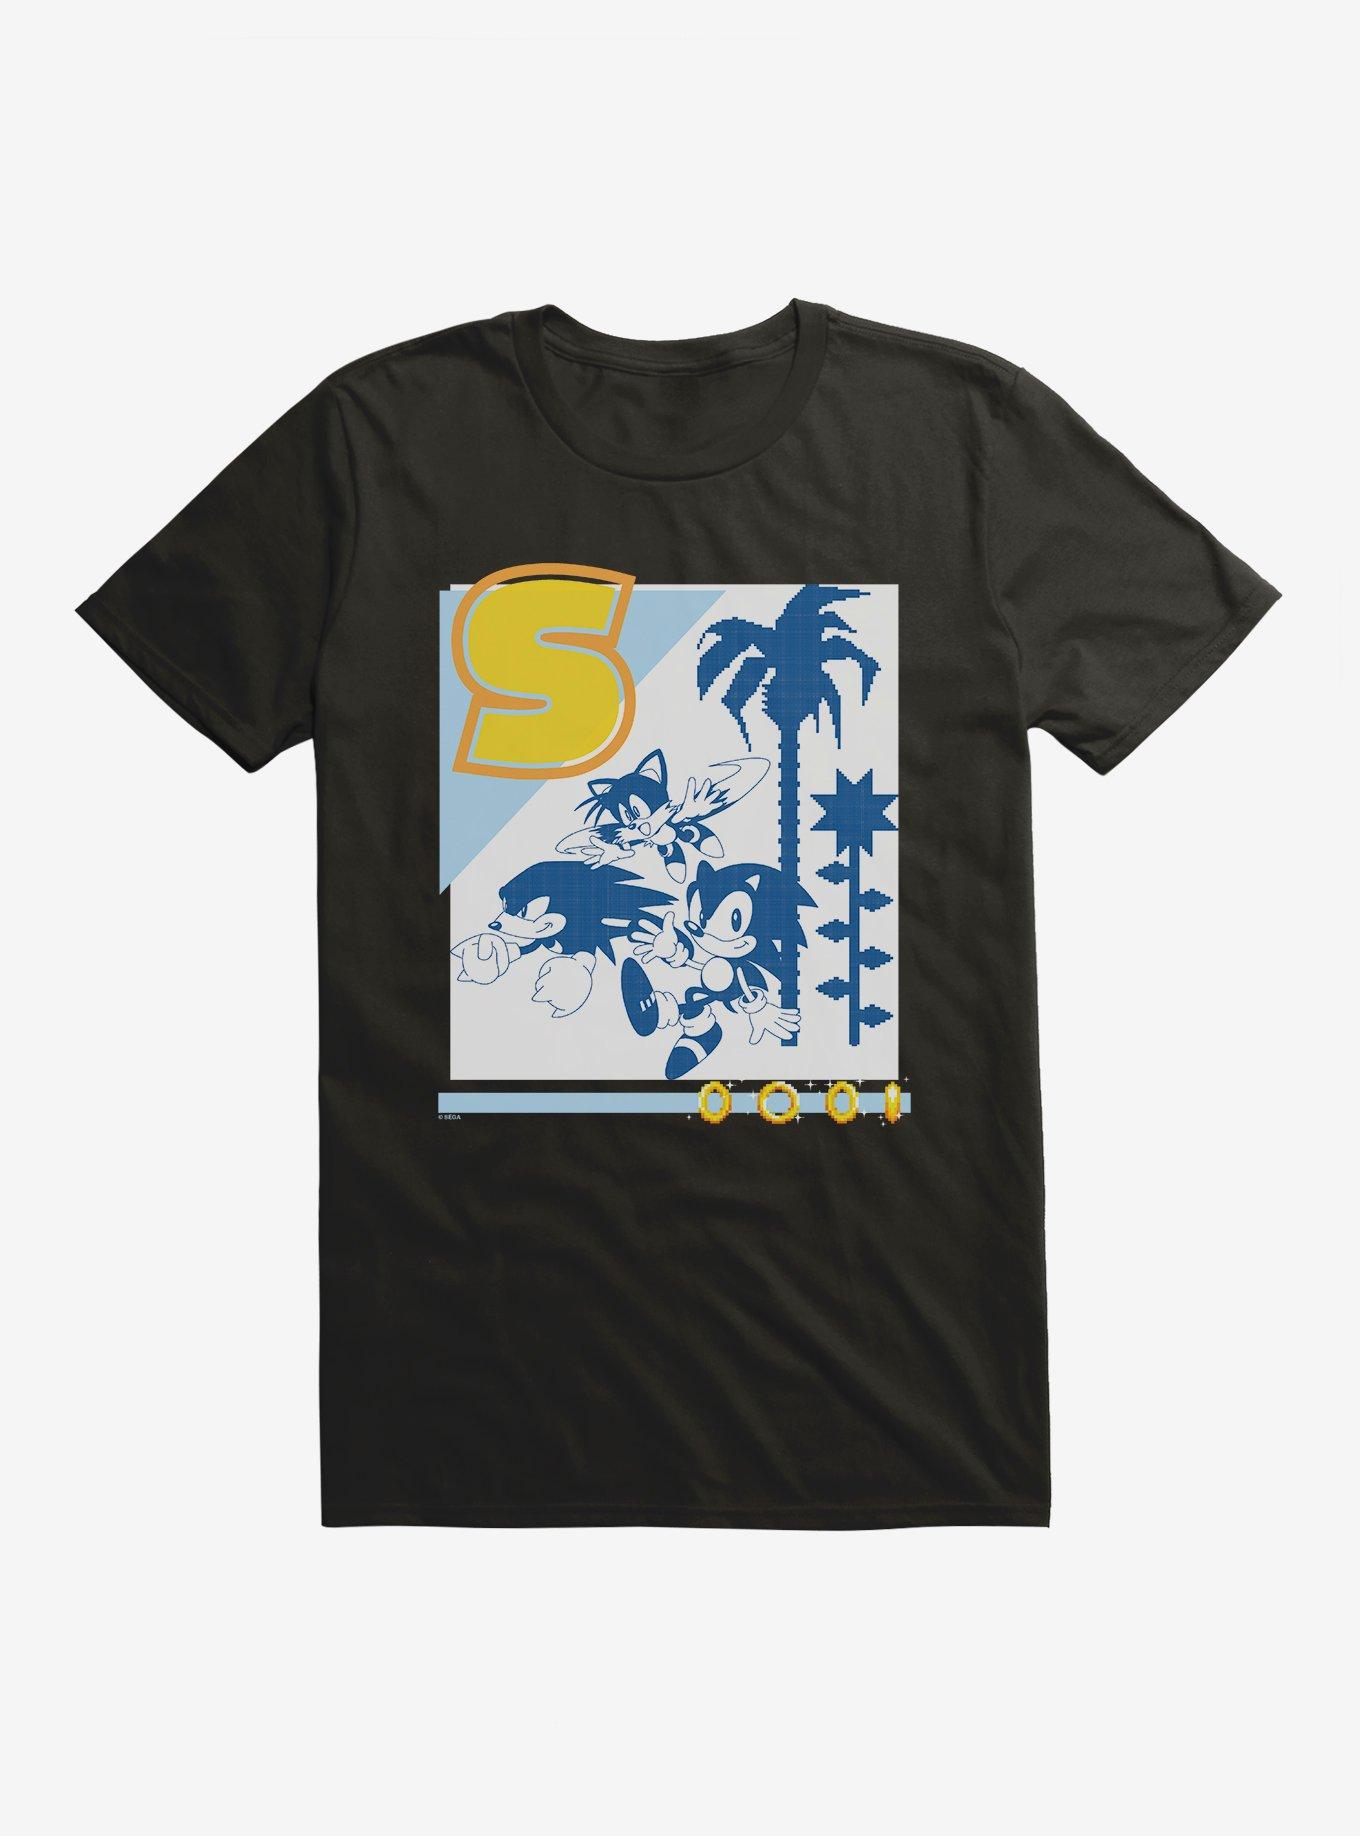 Sonic The Hedgehog Sonic, Tails, And Knuckles T-Shirt | Hot Topic